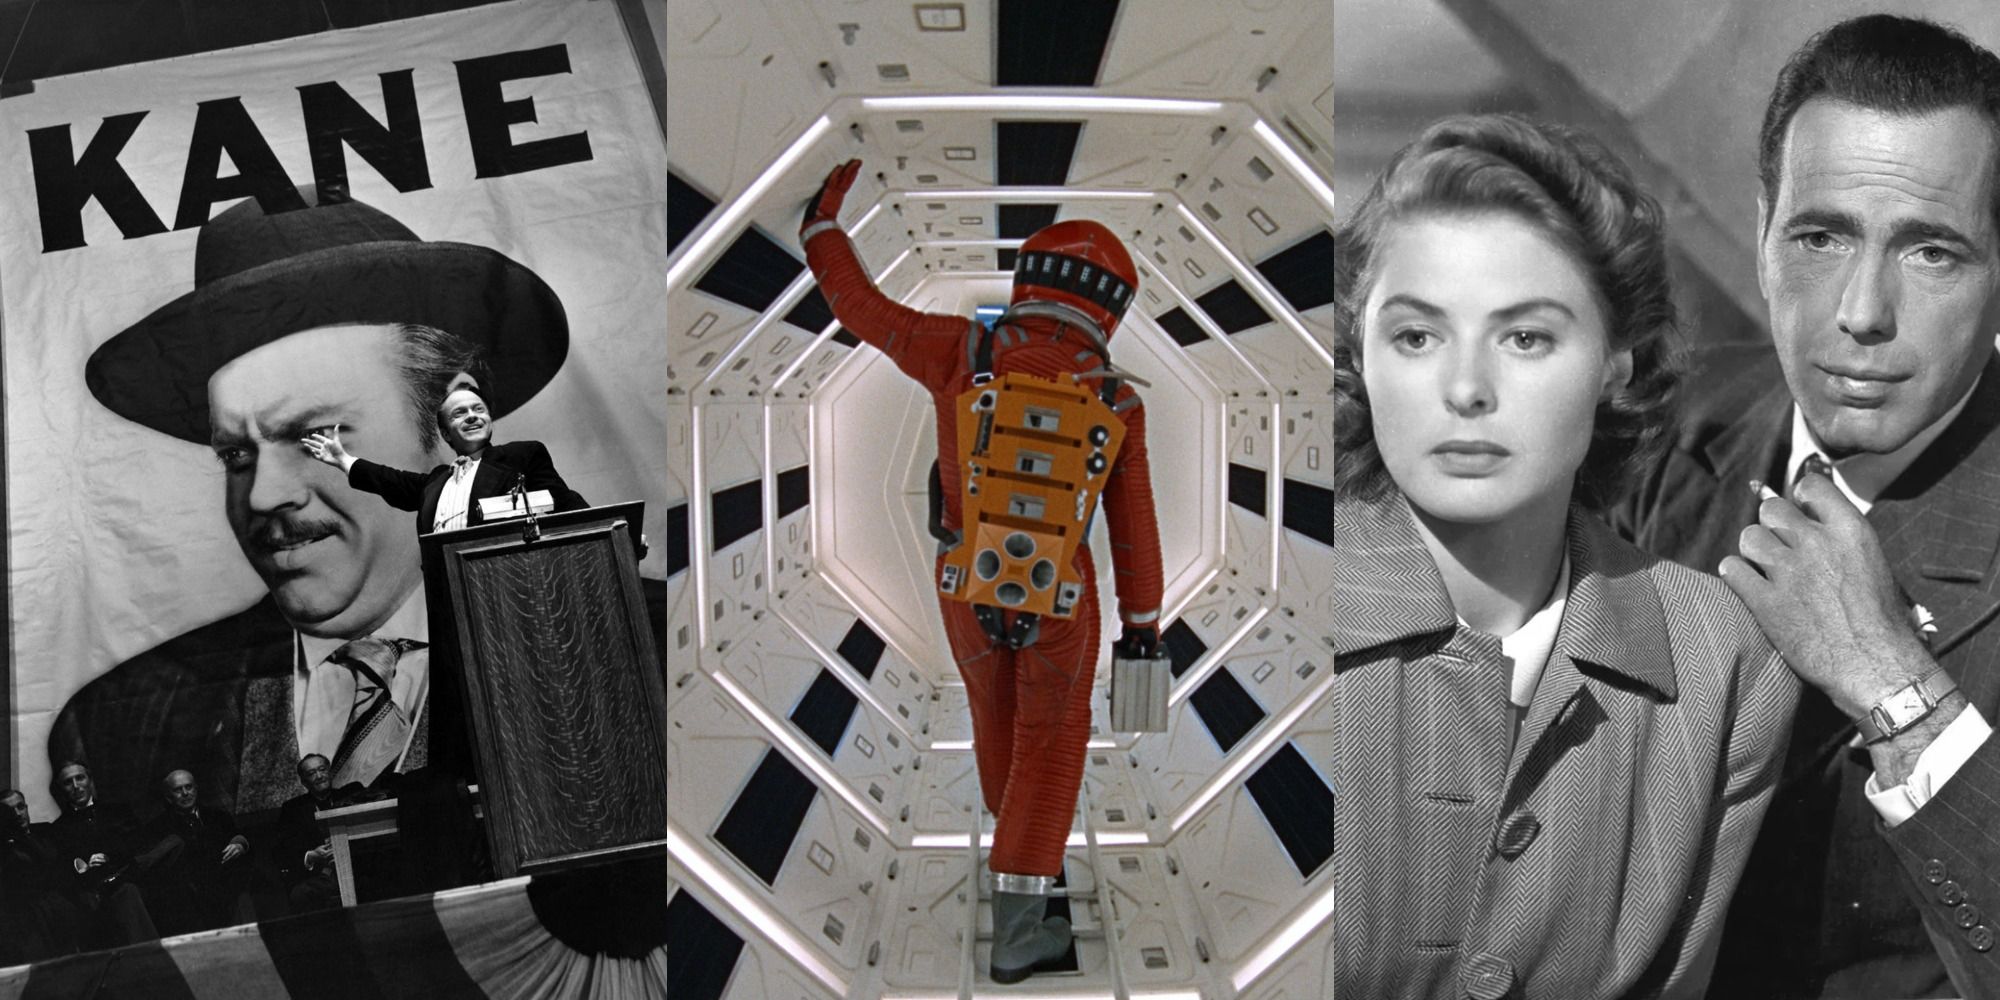 combined images from Casablanca, Citizen Kane, and 2001 A Space Odyssey featuring the main stars